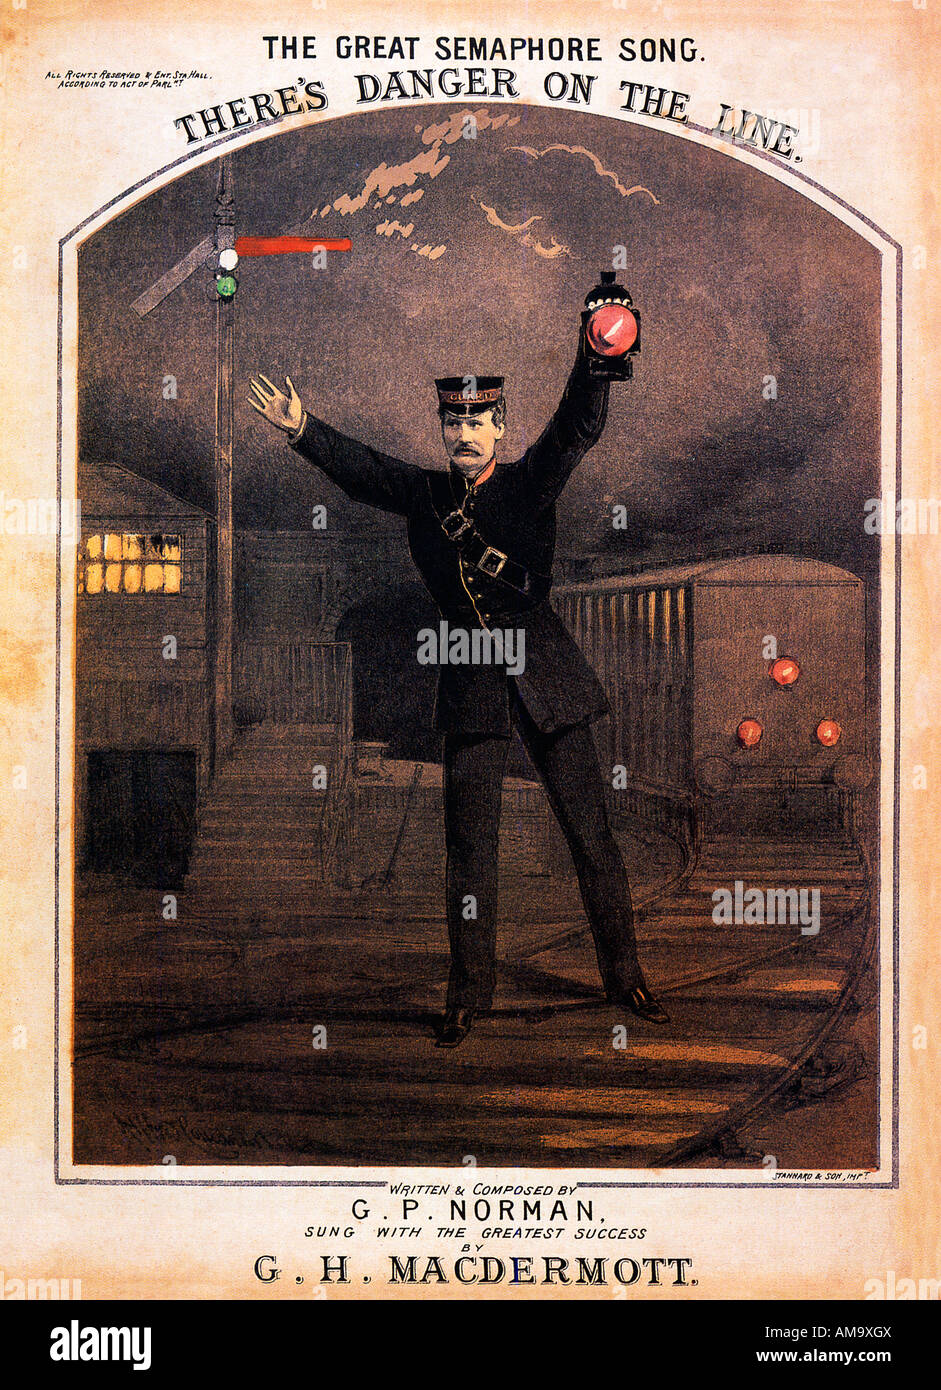 Danger On The Line The Great Semaphore Song a music sheet cover from 1875 on a hero of the tracks Stock Photo